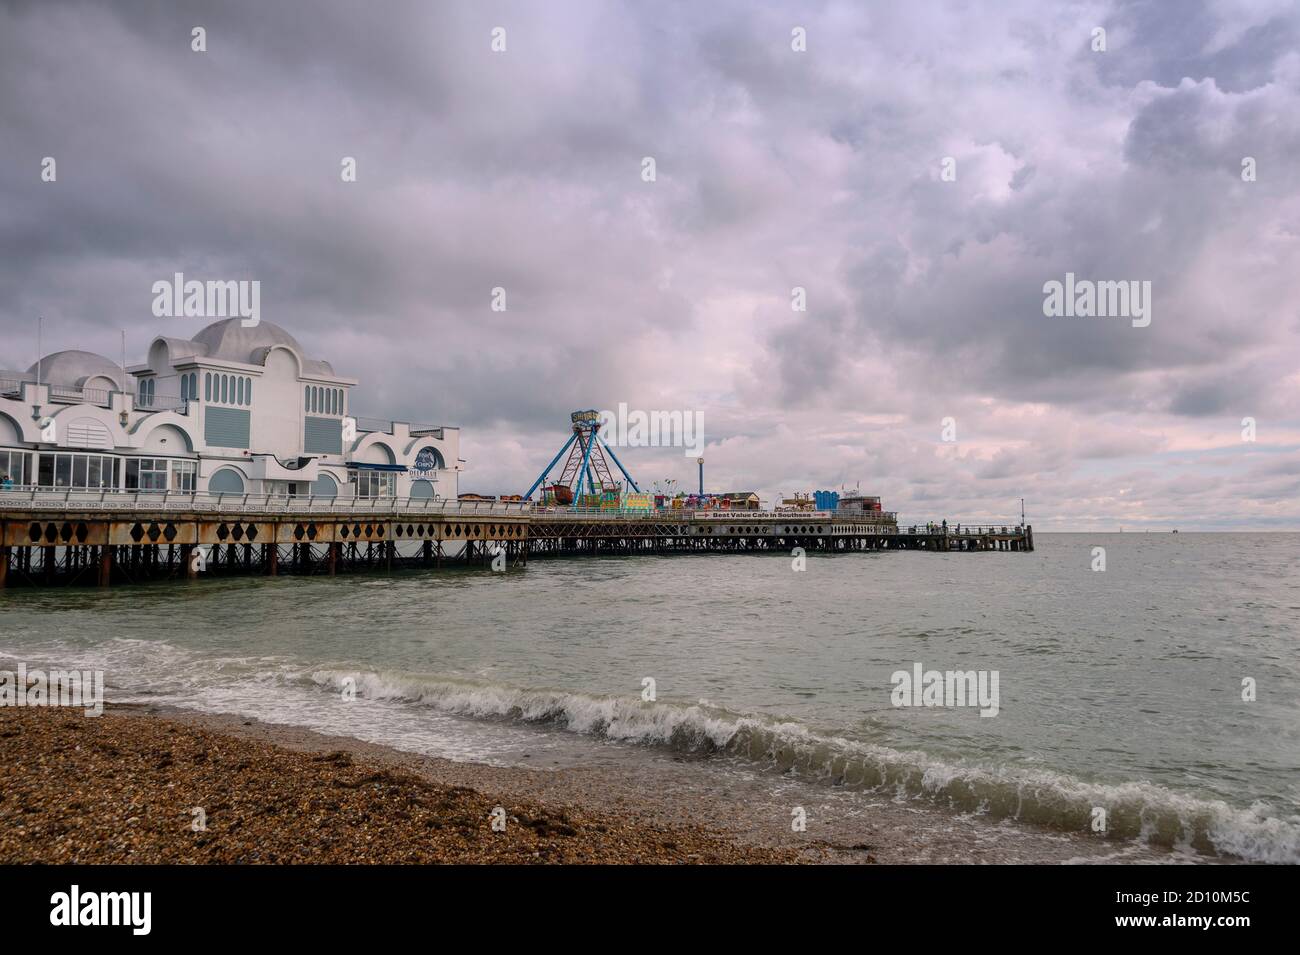 storm clouds over South Parade Pier, Southsea, UK. Traditional seaside pier in Britain. Stock Photo